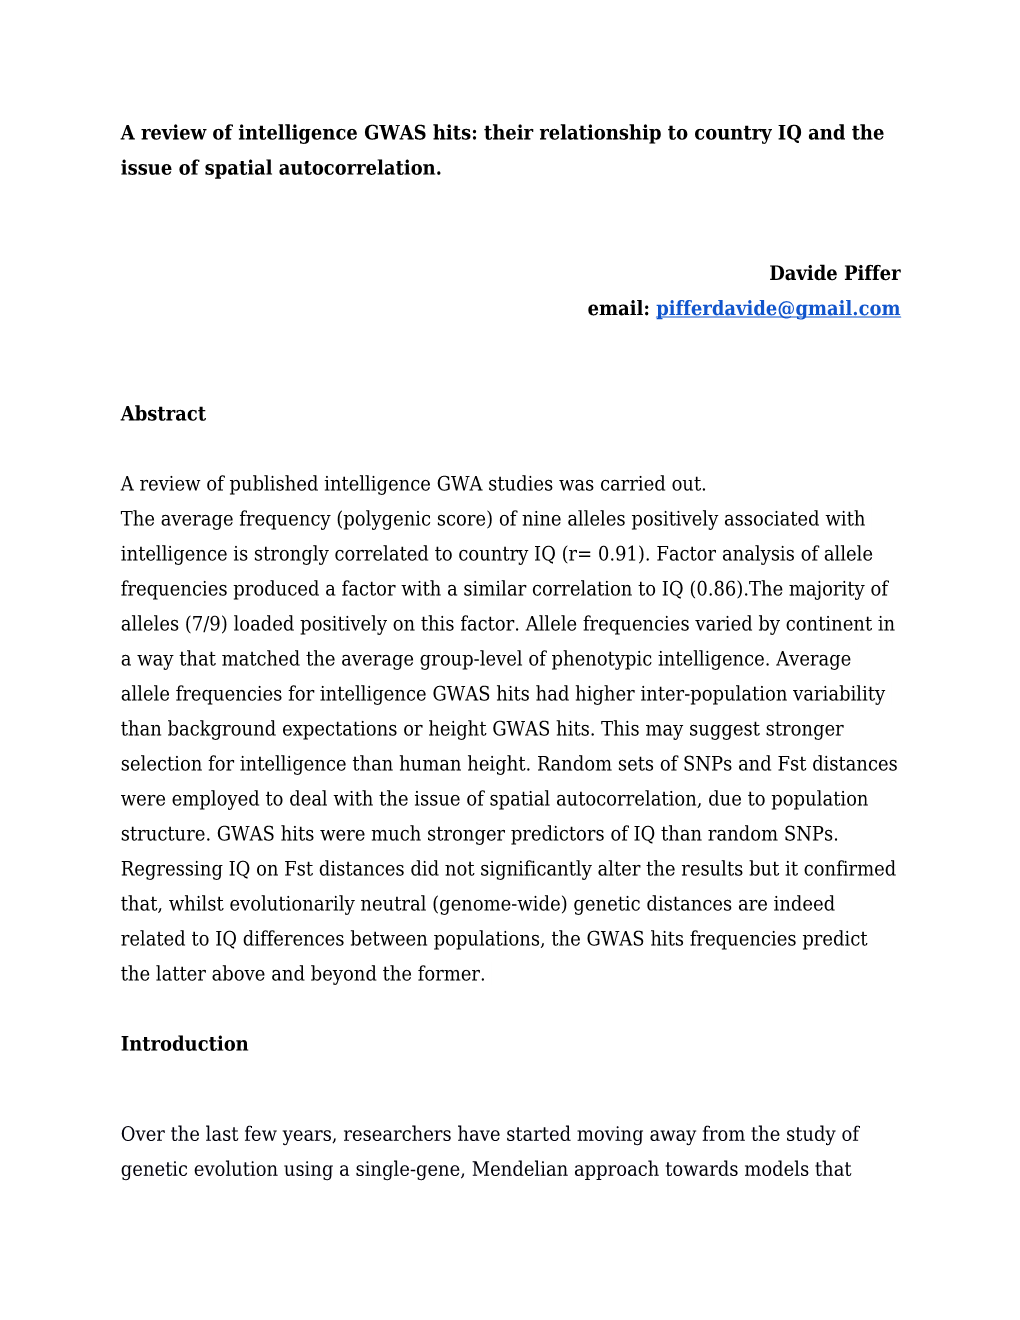 A Review of Intelligence GWAS Hits: Their Relationship to Country IQ and the Issue Of